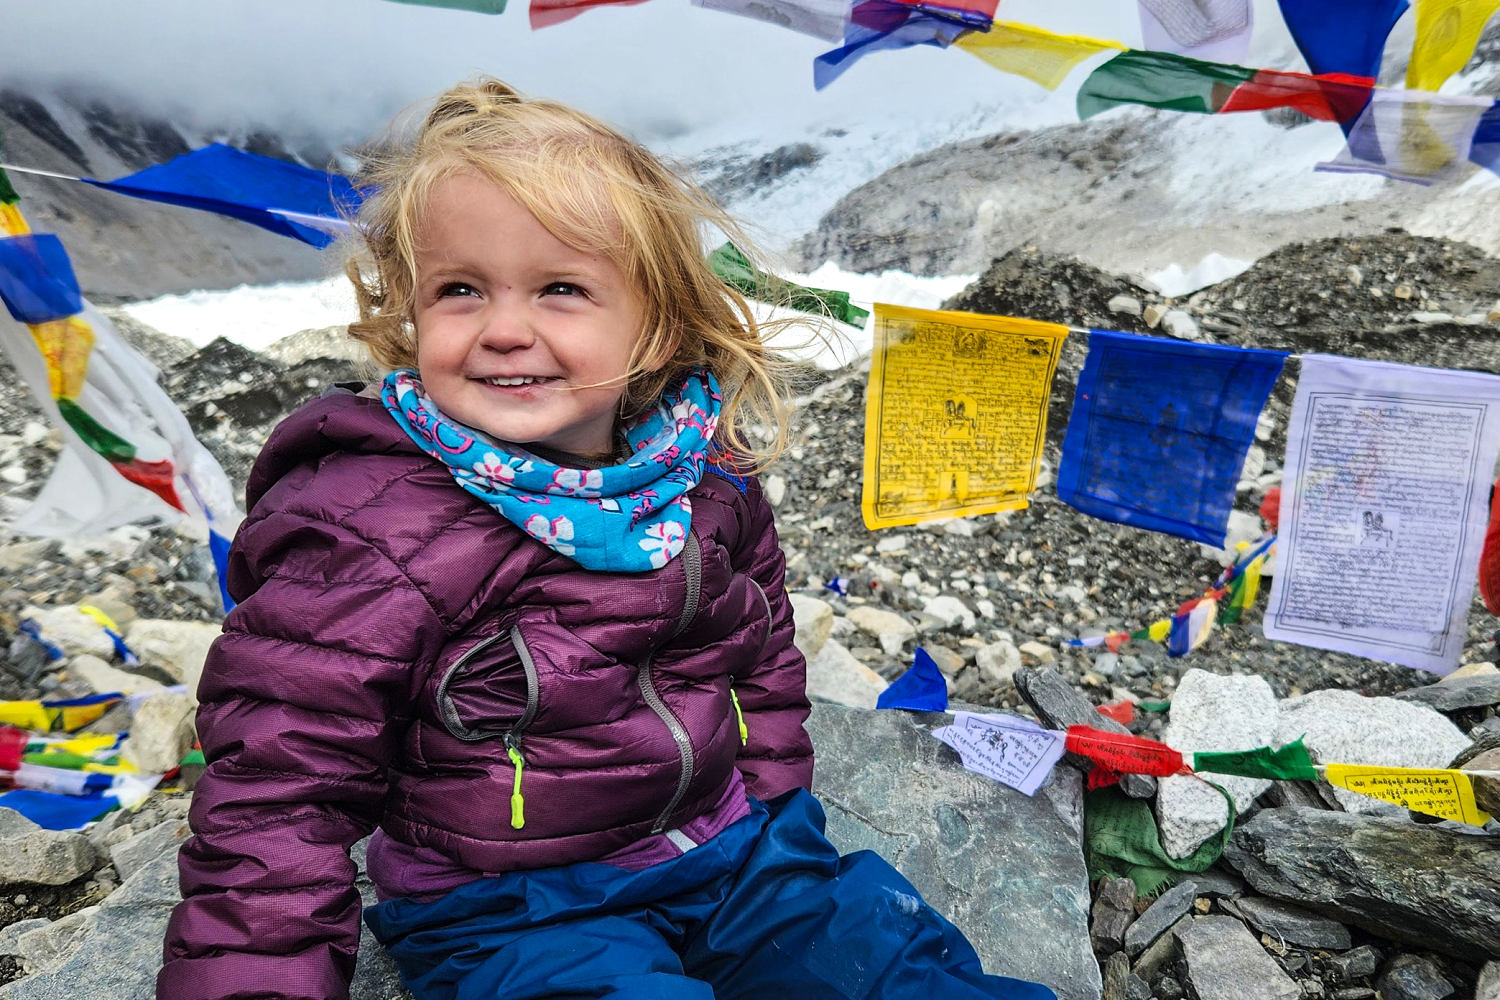 Meet the families who’ve taken children as young as 2 to Everest Base Camp